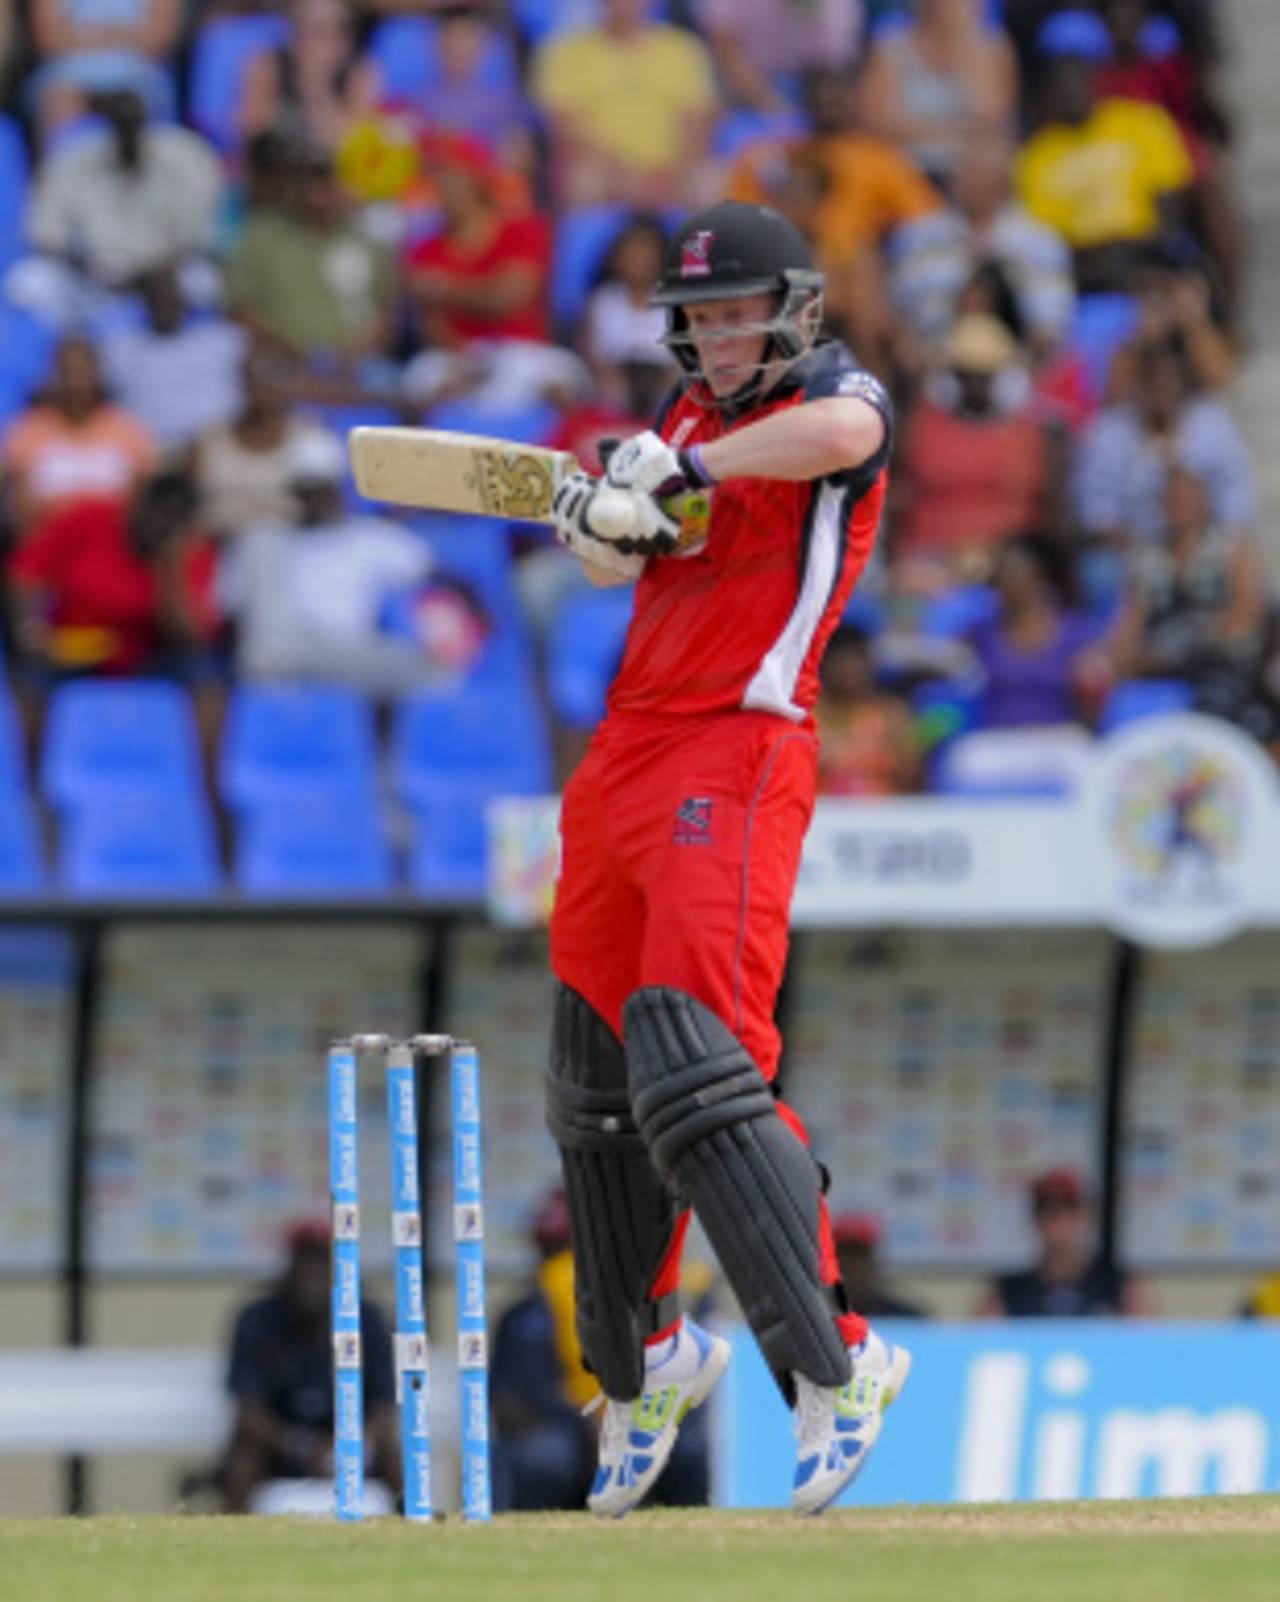 Kevin O'Brien fights off a short ball, Antigua Hawksbills v Red Steel, CPL 2014, North Sound, July 20, 2014